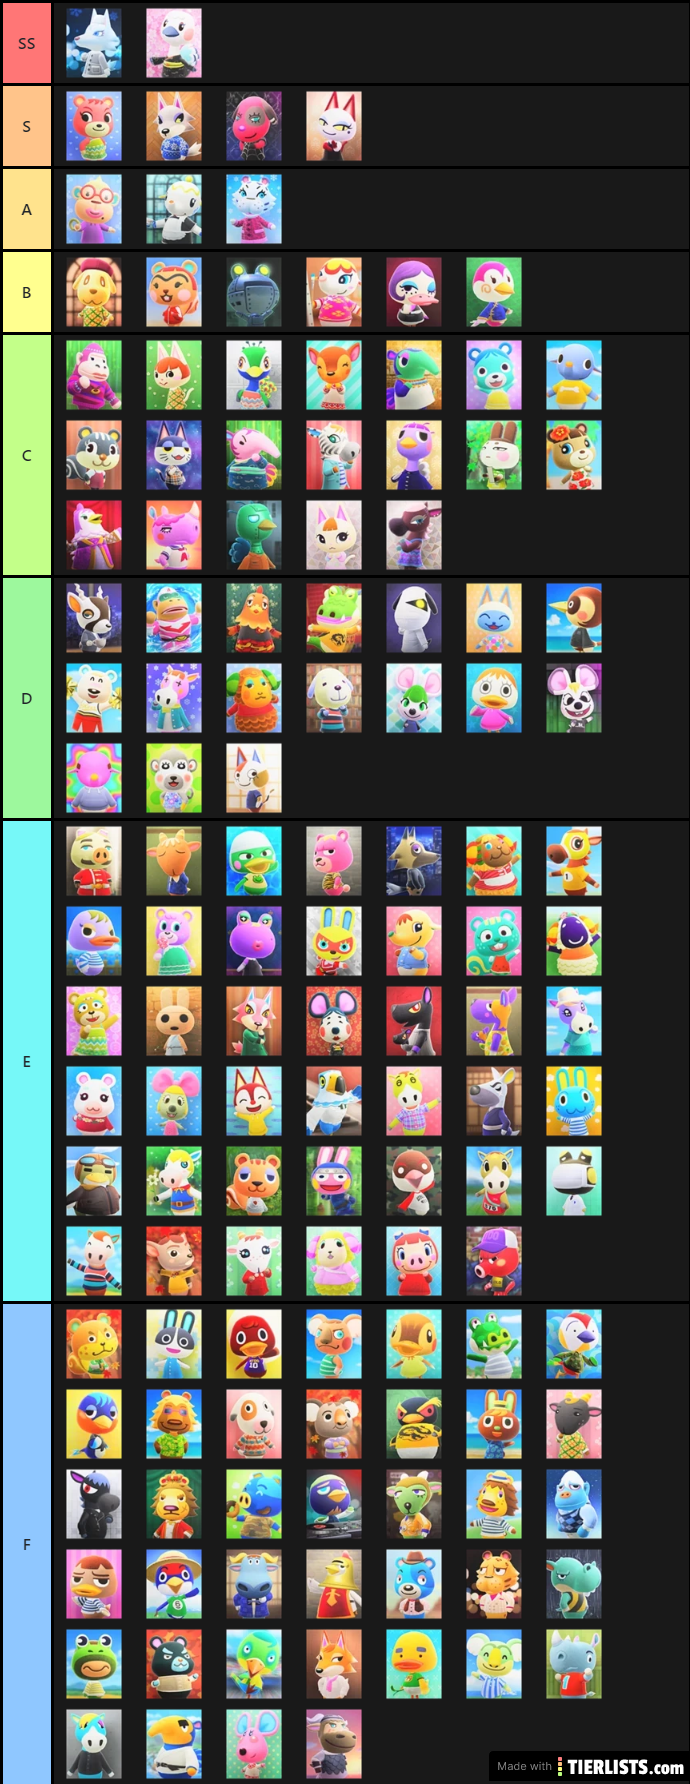 Acnh Full Villager List Acnh Villagers Tierlists The Art of Images